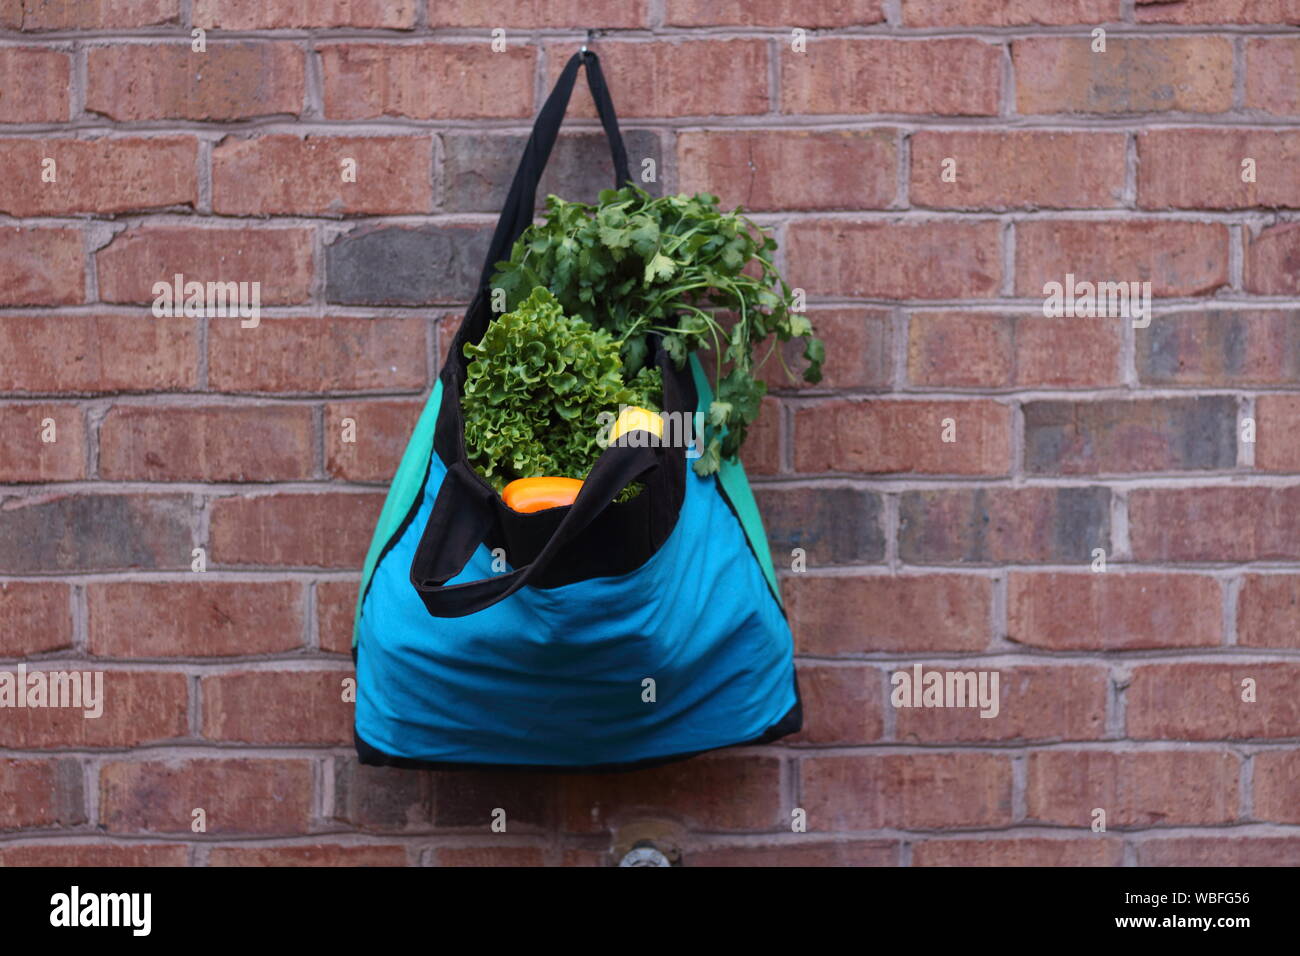 Groceries In Bag Hanging On Brick Wall Stock Photo